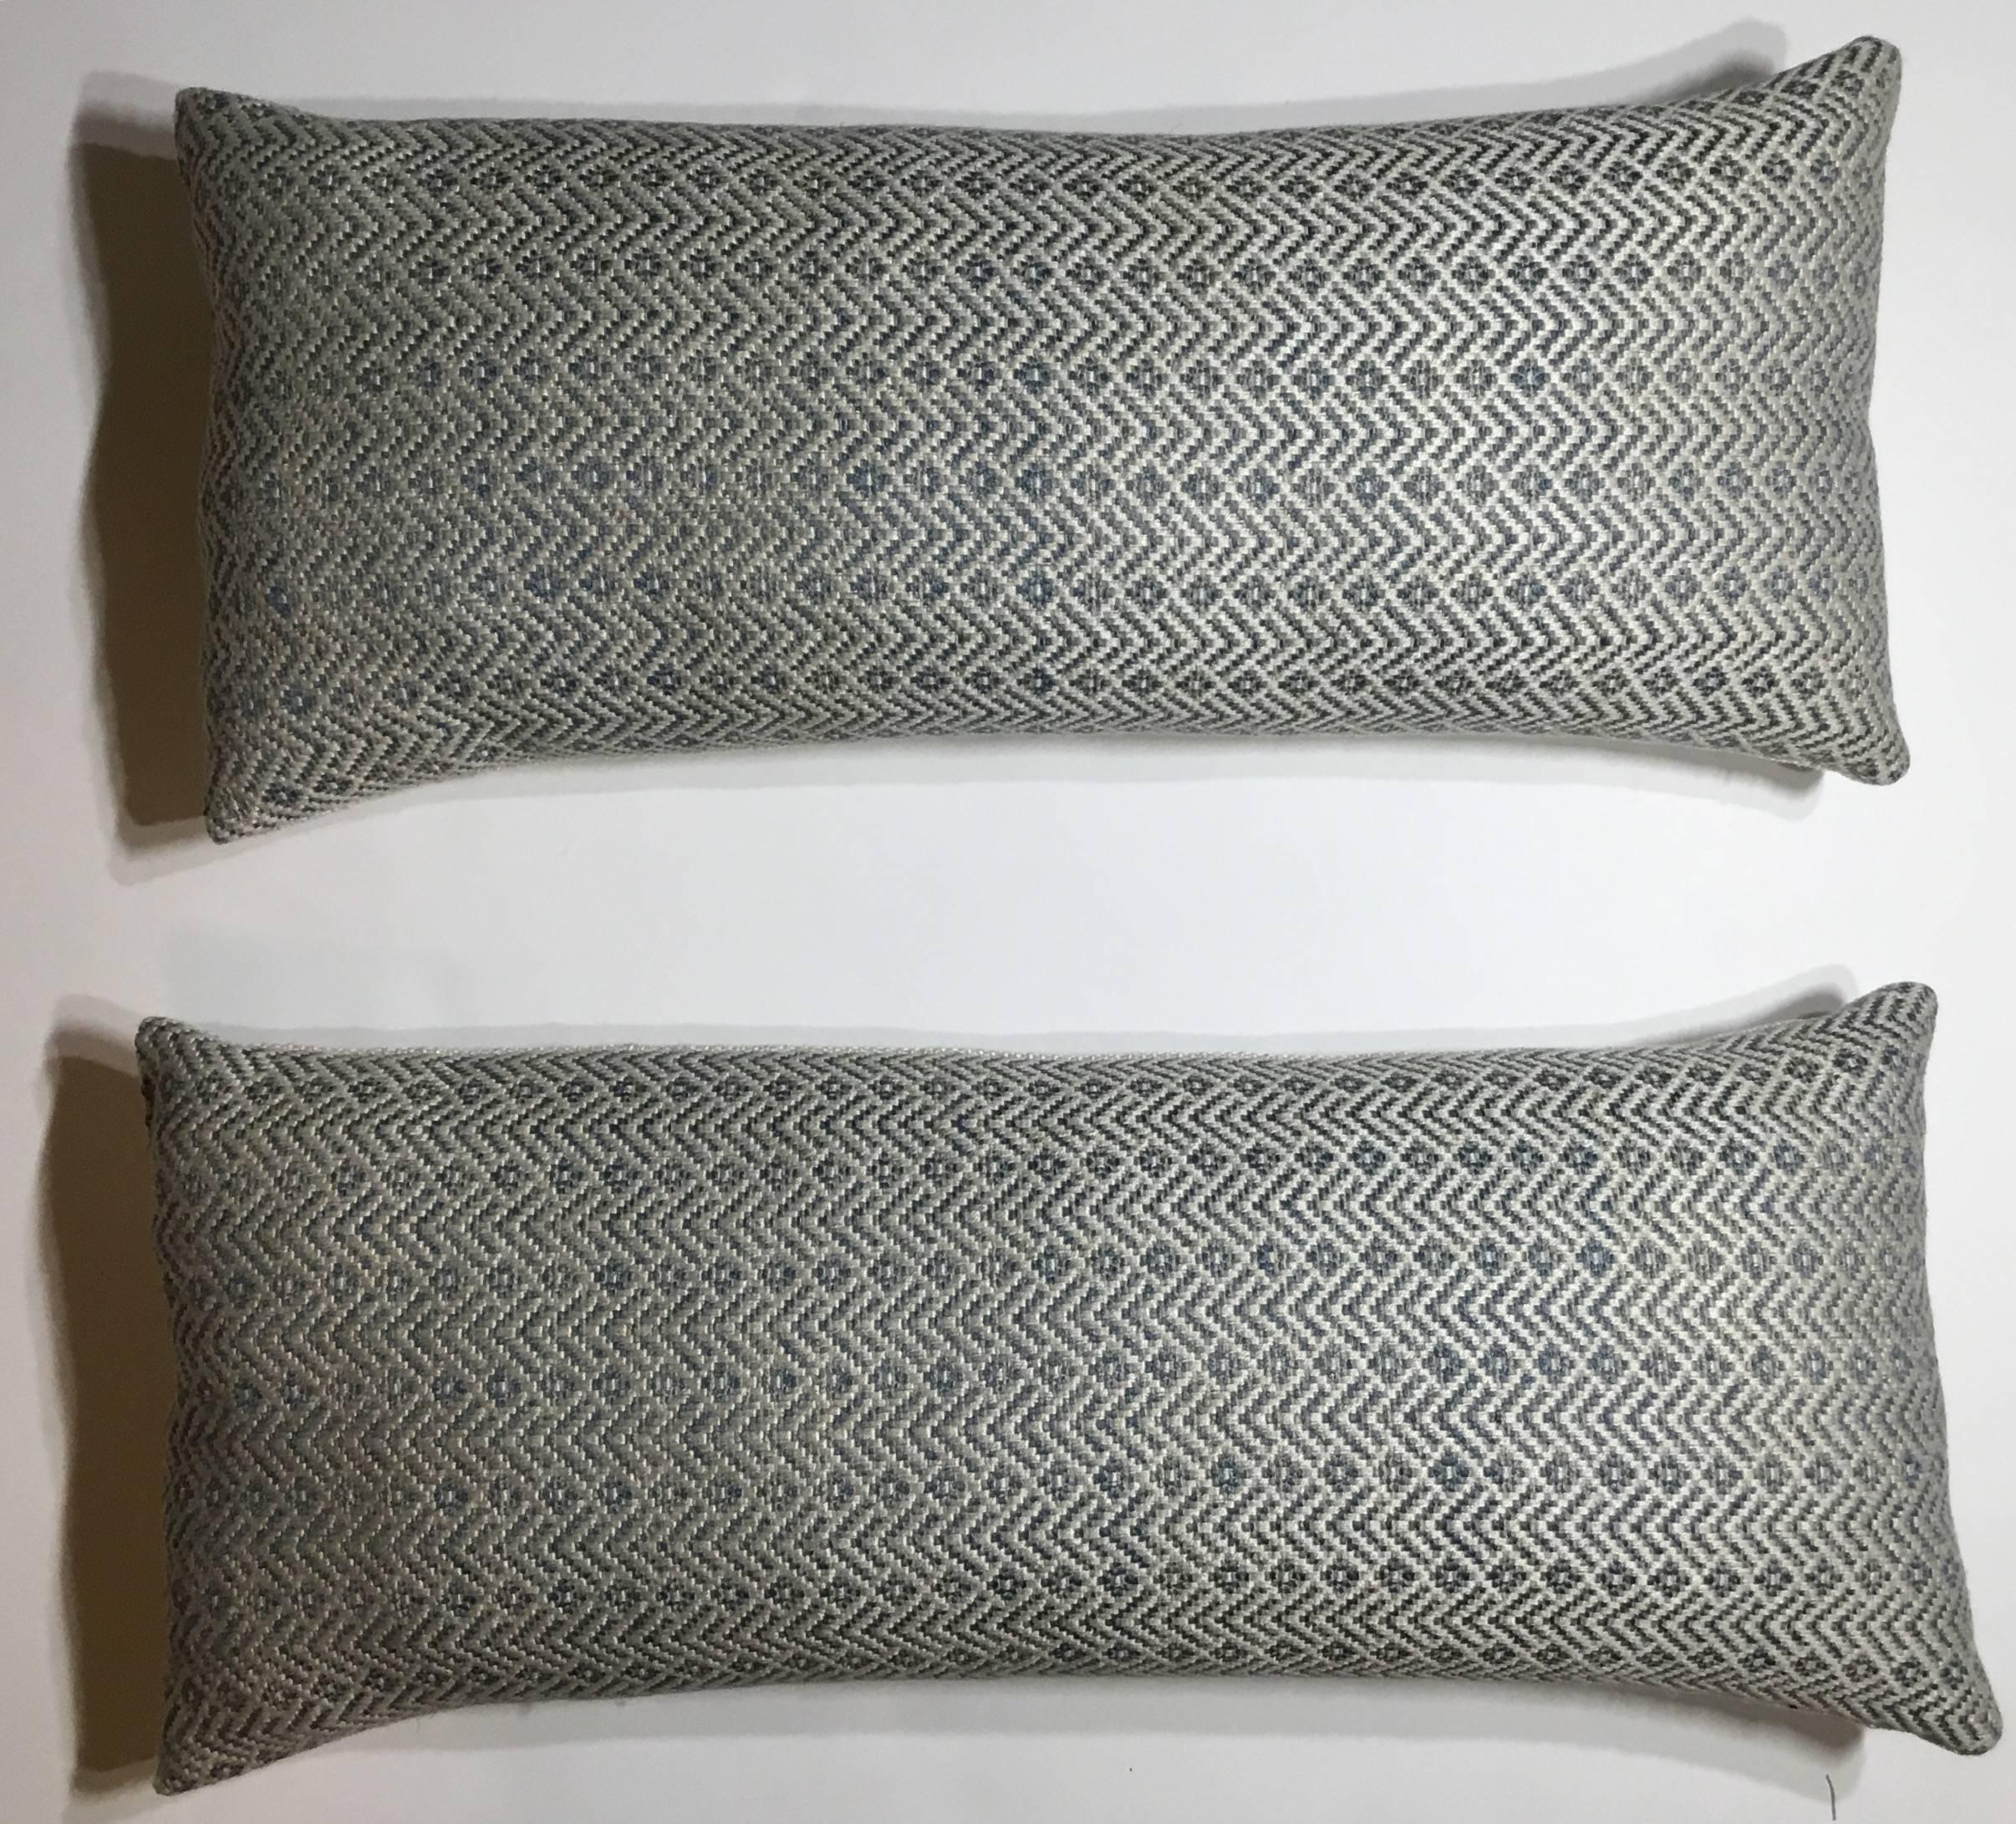 Elagent pair of pillow made of fine quality vintage French textile, frash inserts,
linen backing.